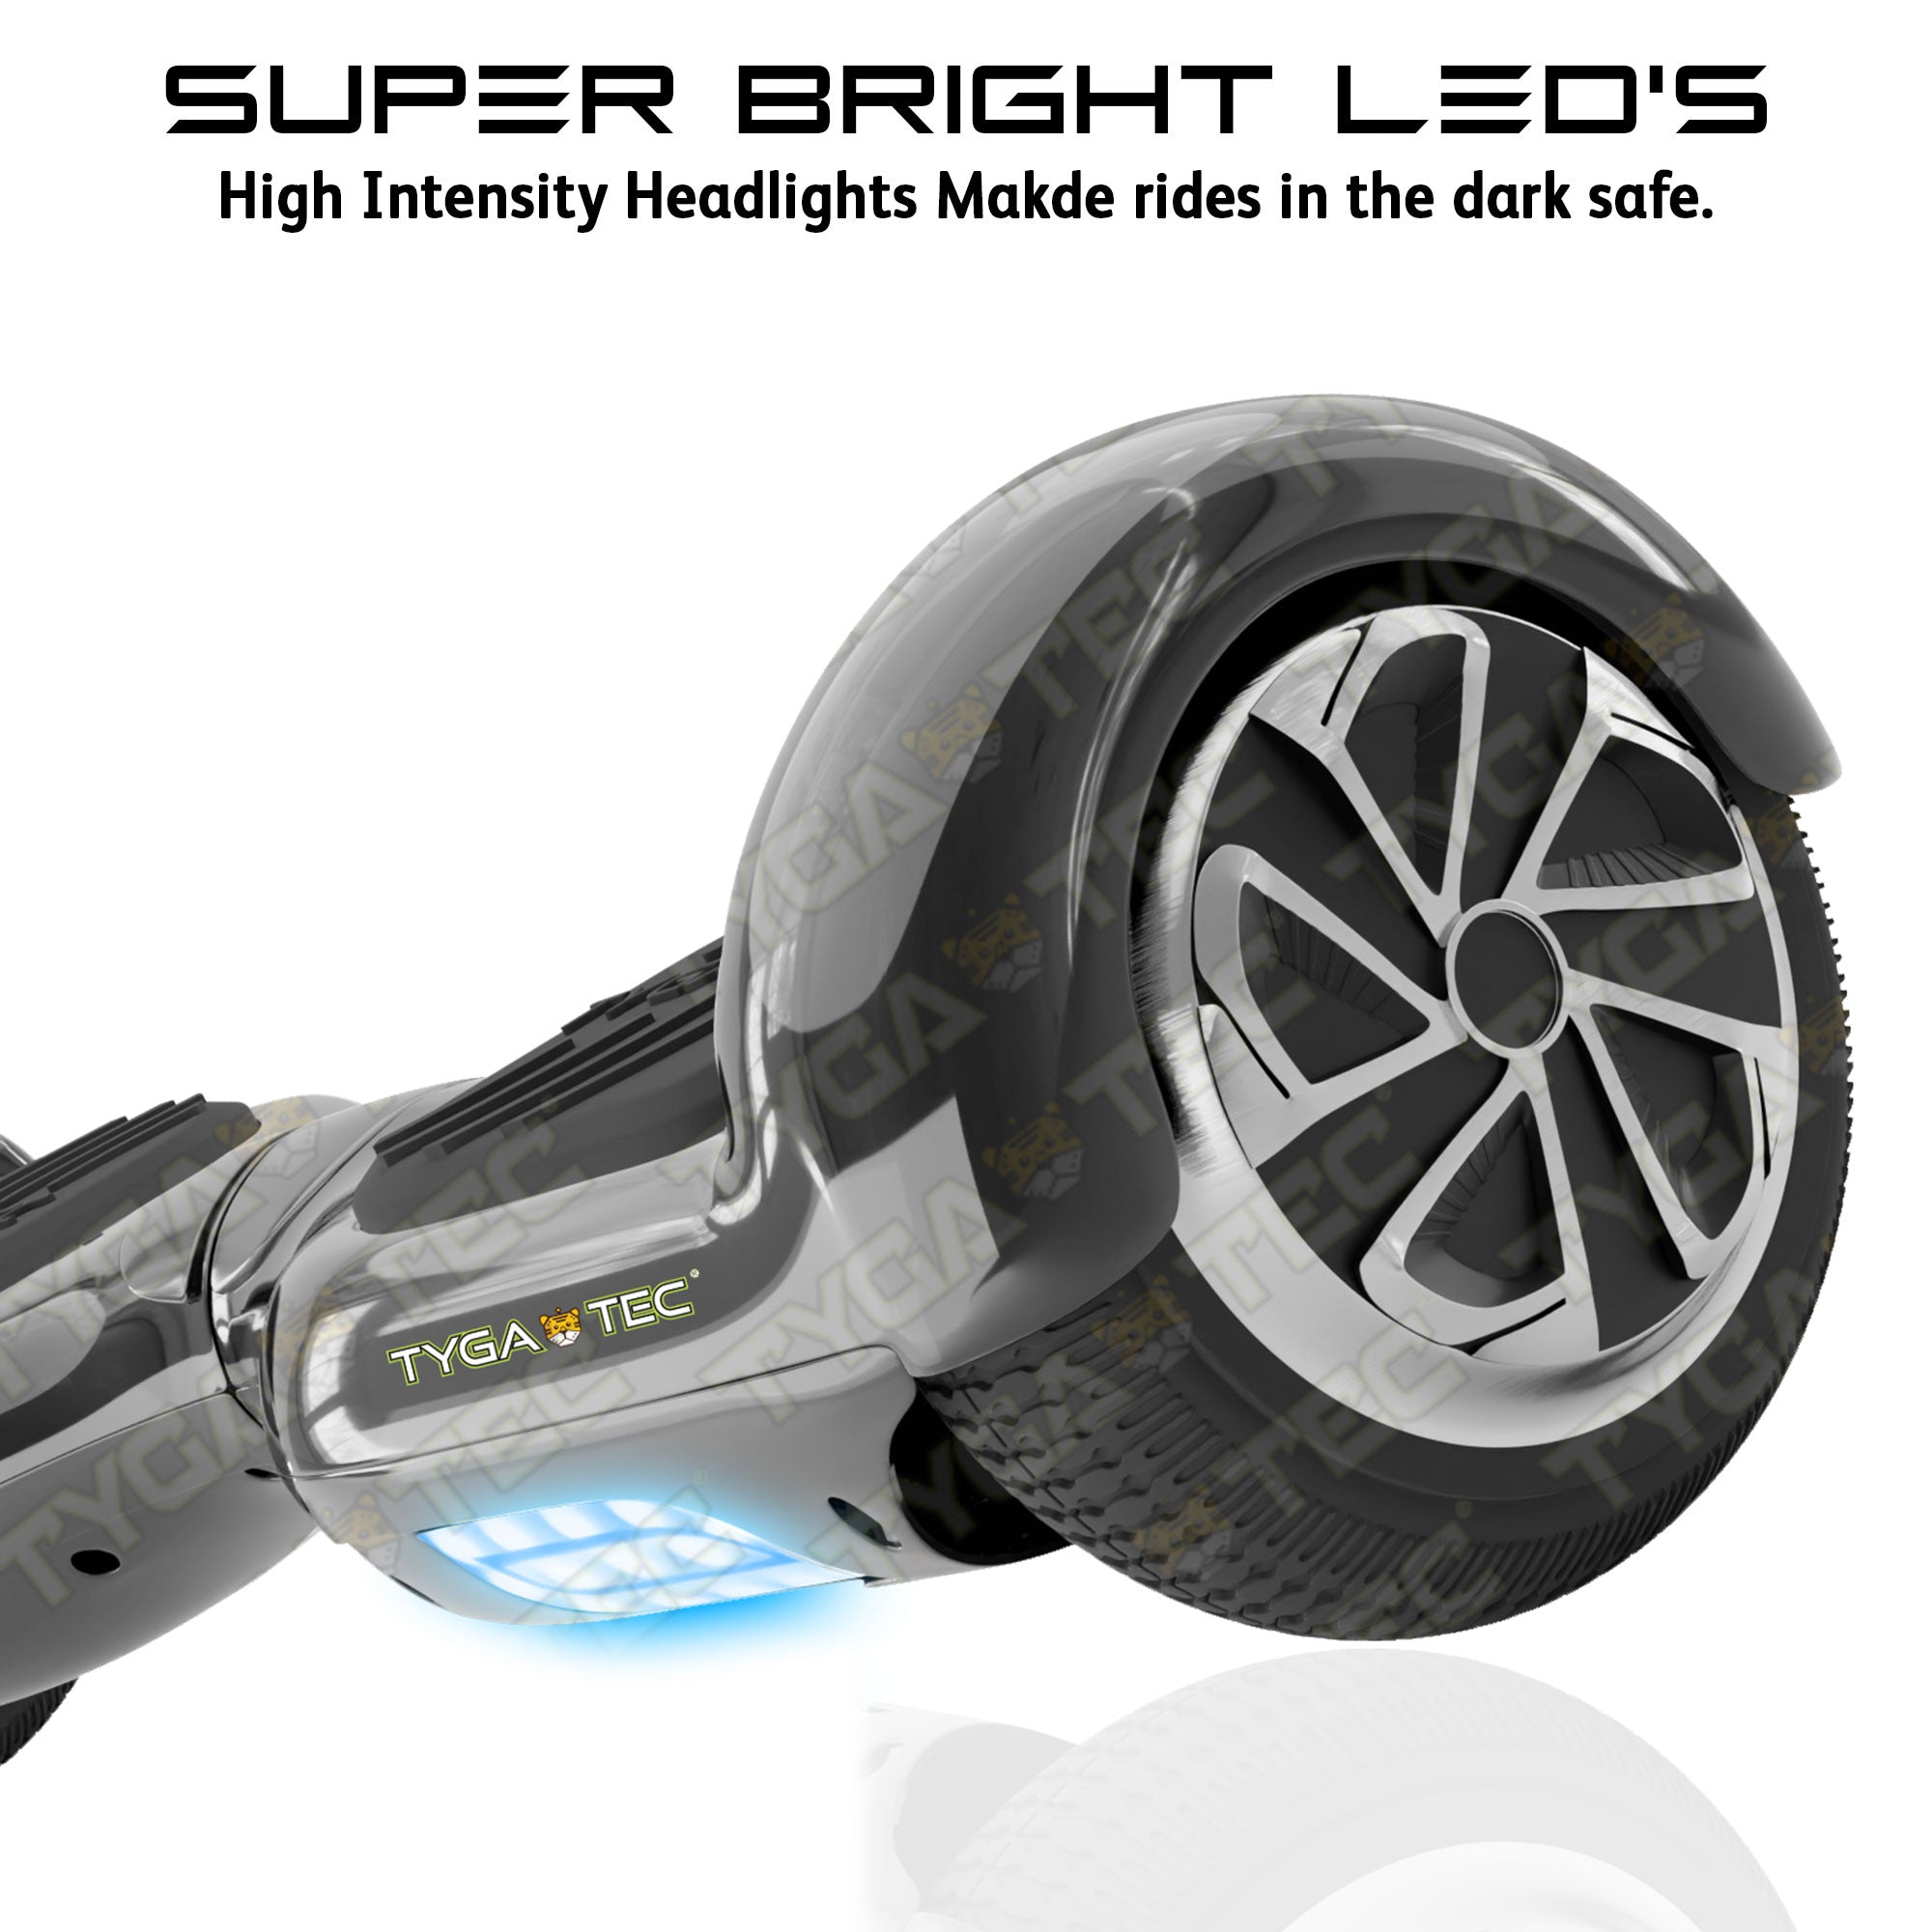 TYGATEC T2 Auto Balancing Hoverboard - Black